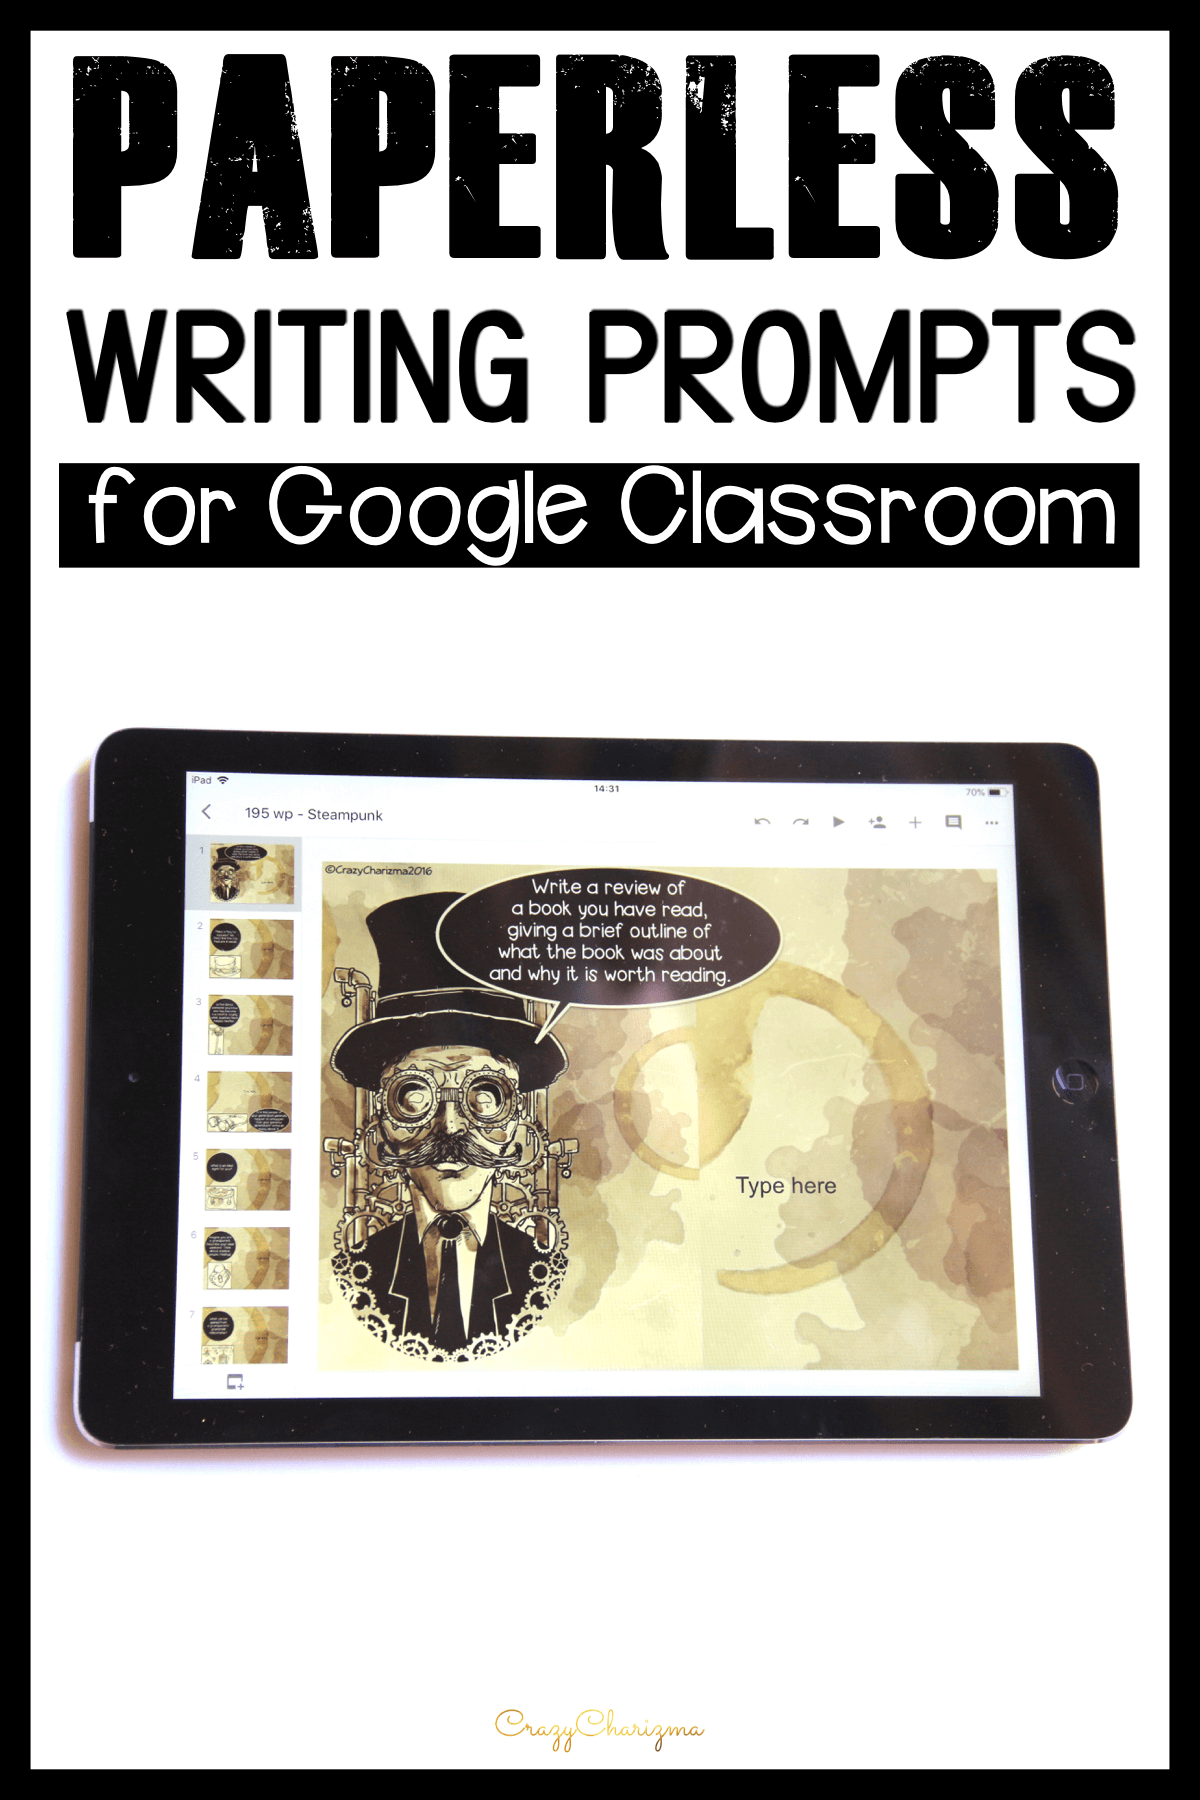 Looking for digital resources for quick student writing activities? Use these prompts easily in Google Classroom, and let the students start writing right away! Monitor their progress, answer questions and offer feedback as they write!